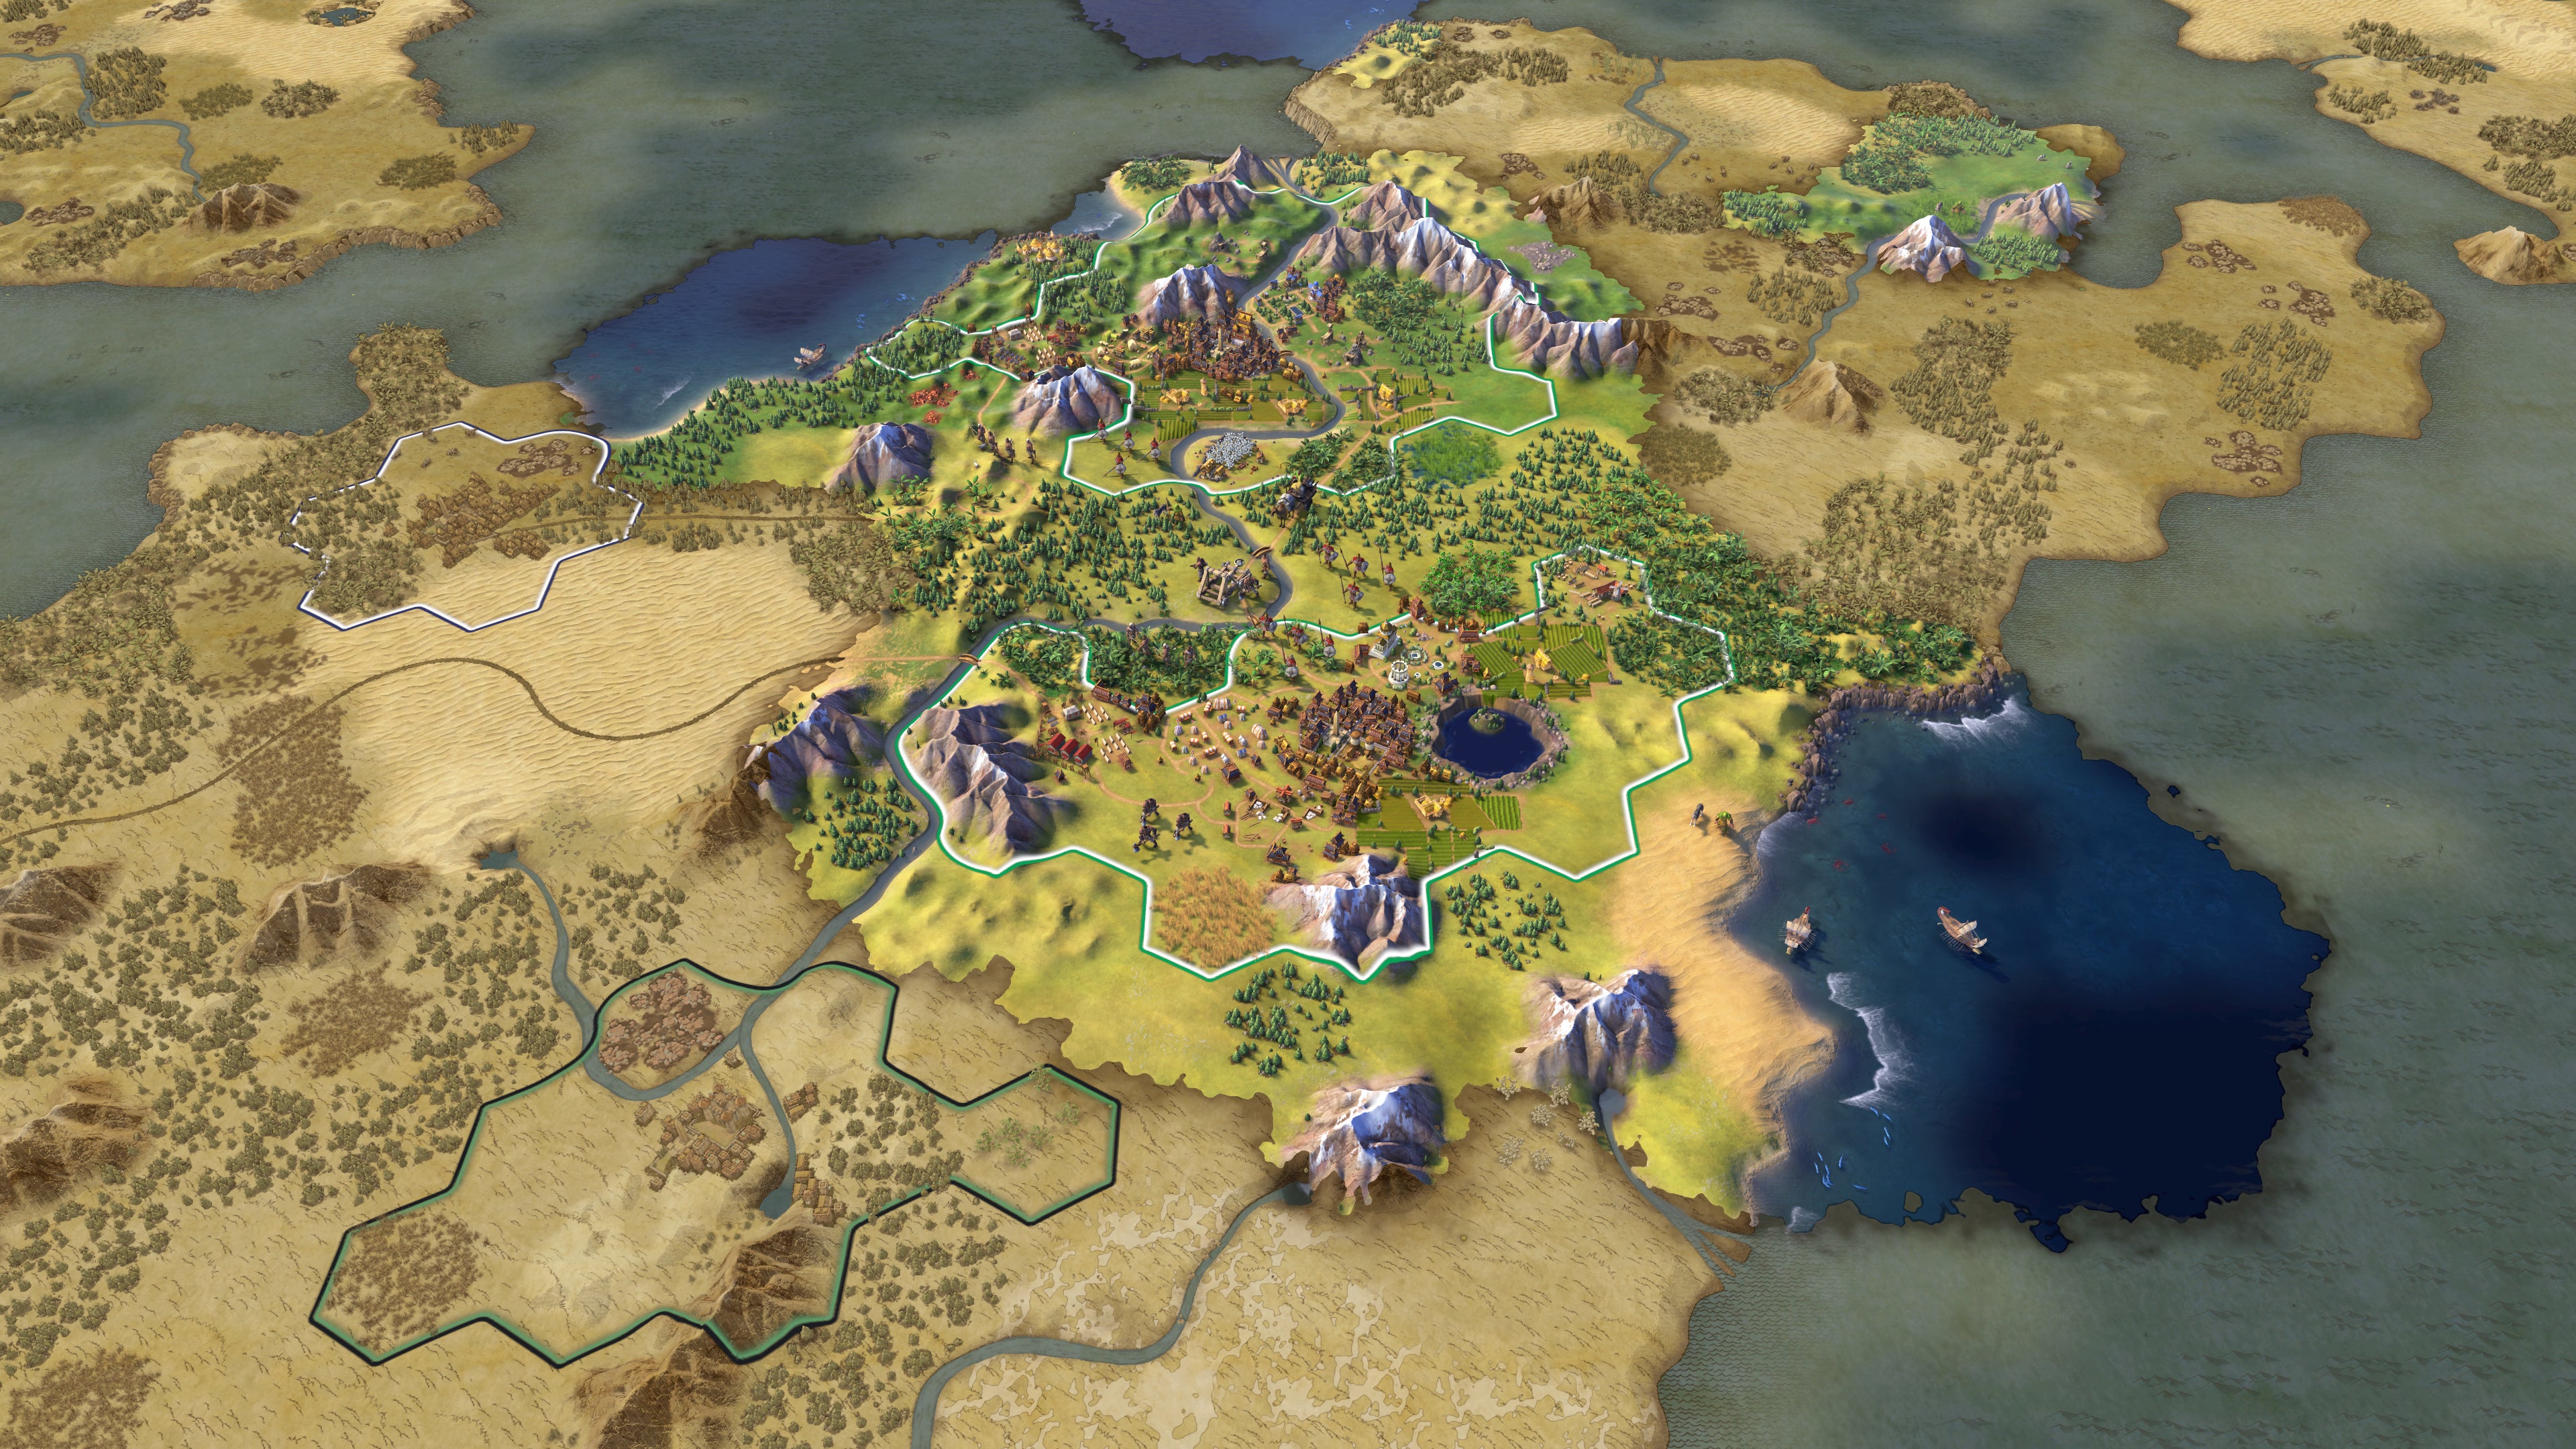 Given the way so much of the later game is buried, Civ VI's early-game exploration phase is probably the highlight (as it is in most Civ games, to be fair) (Screenshot: 2K)